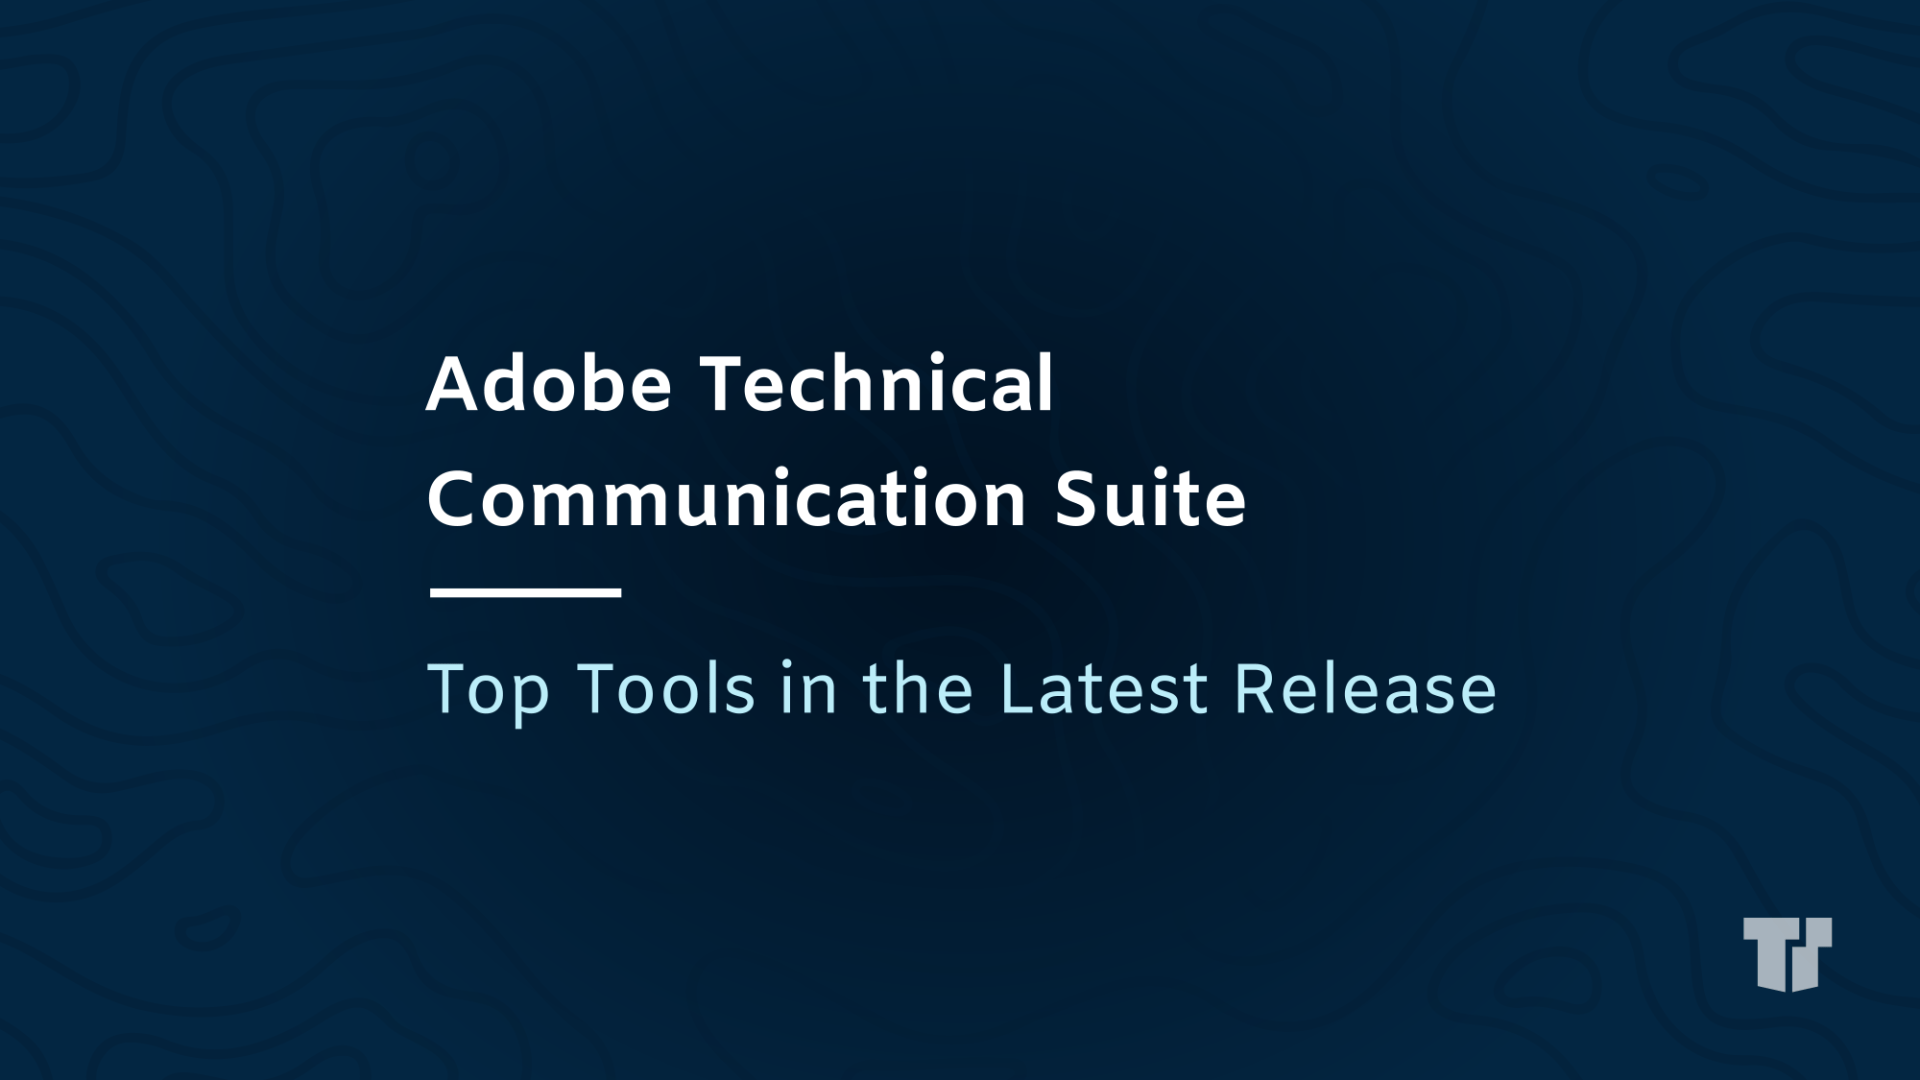 Adobe Technical Communication Suite: Top Tools in the Latest Release cover image